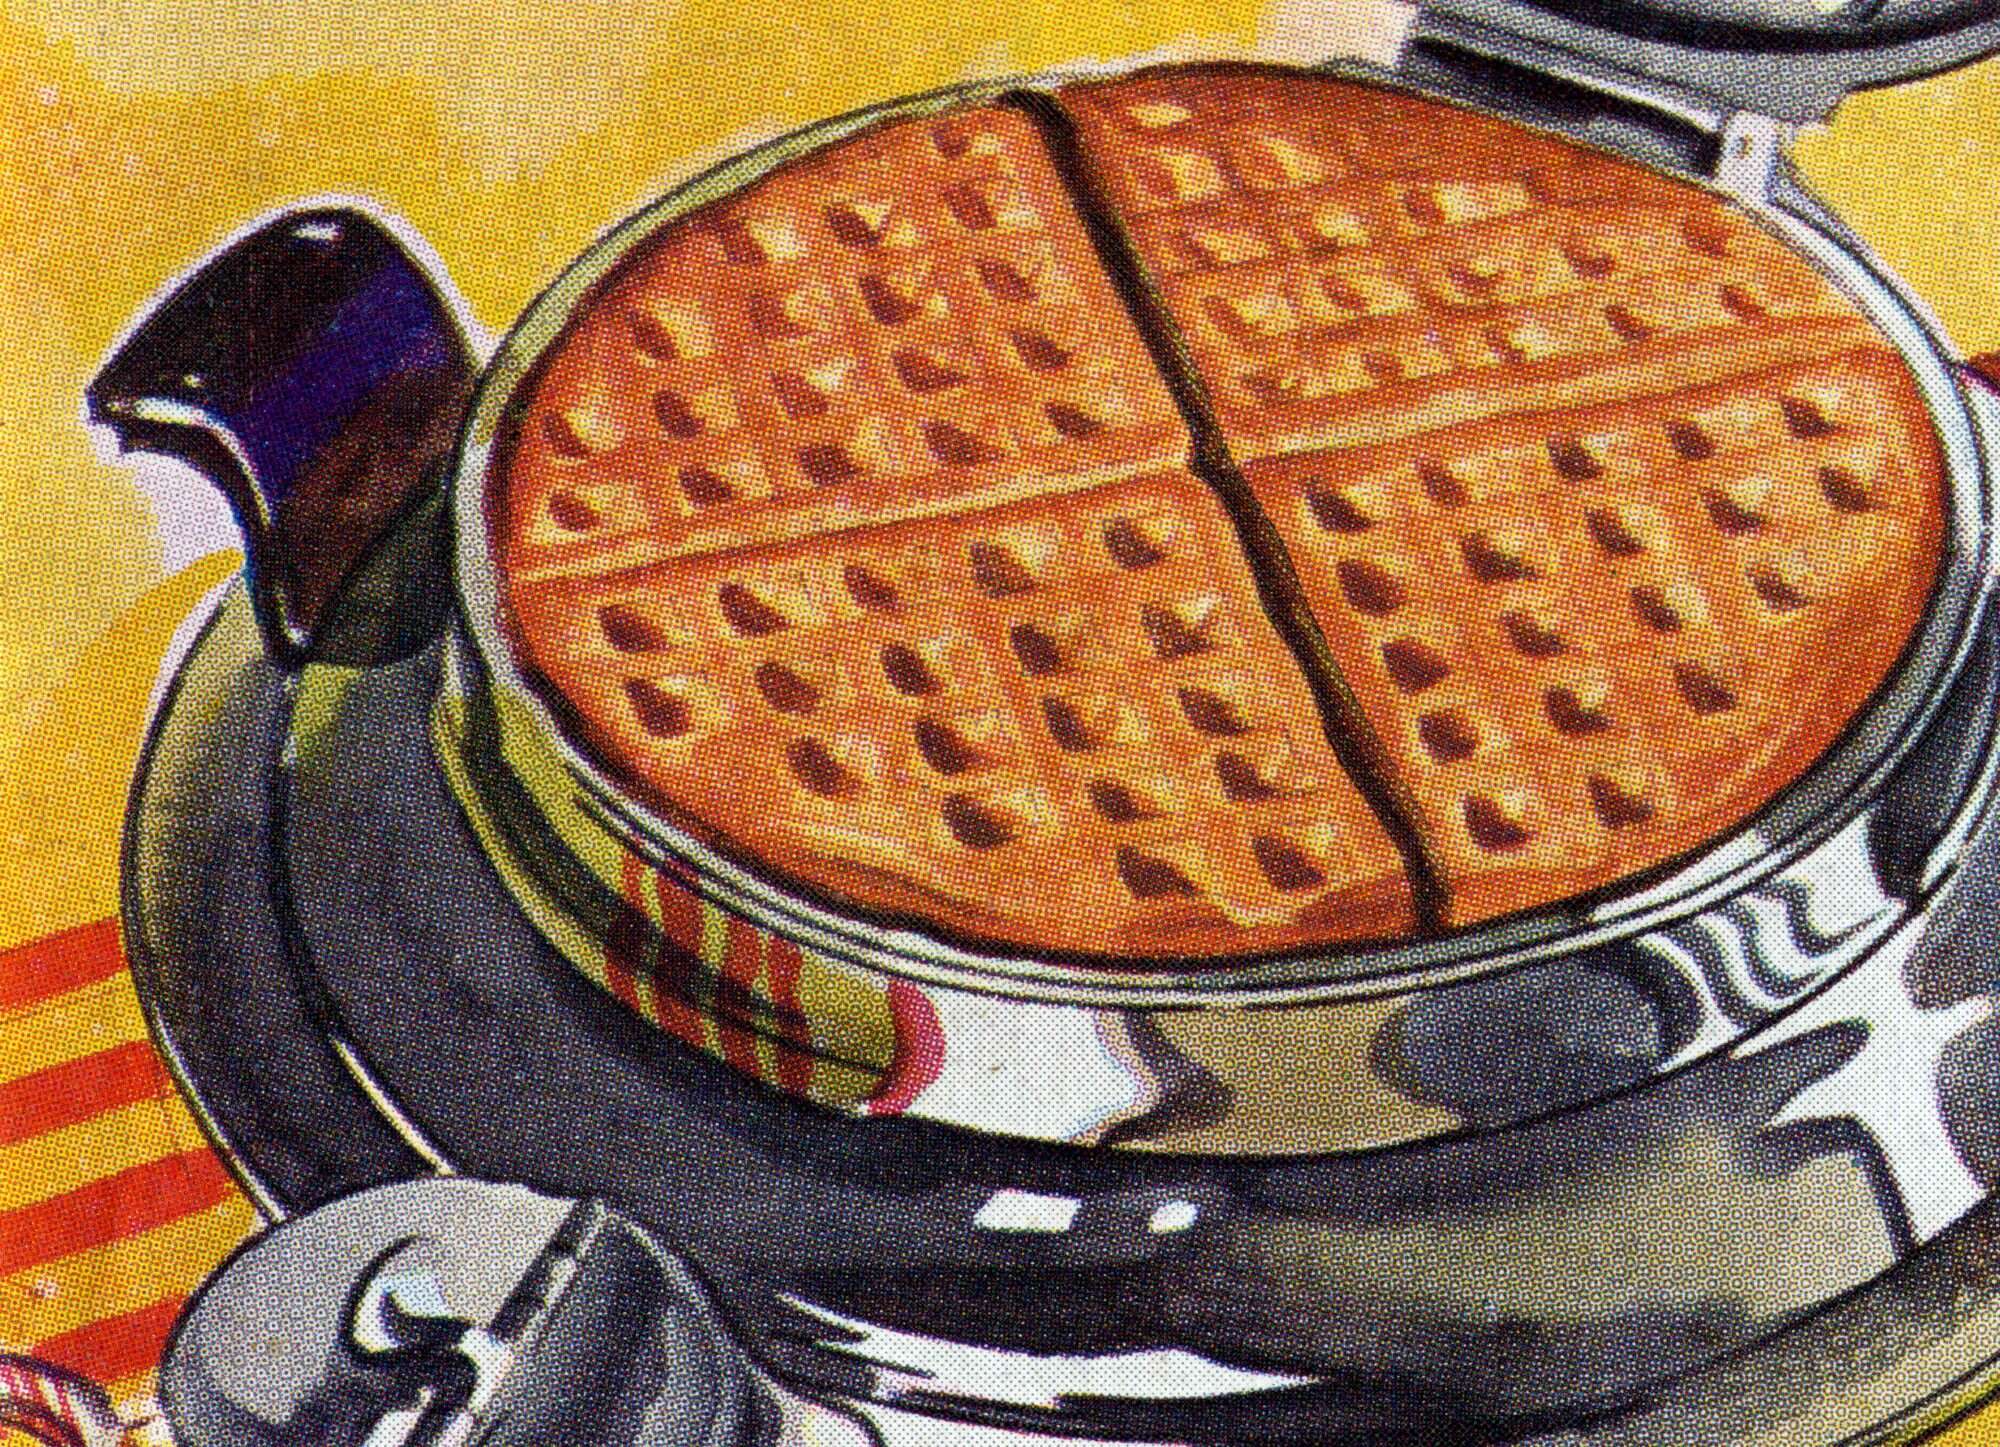 How to Make Cast Iron Waffles in Antique Cast Iron #8 Waffle Maker